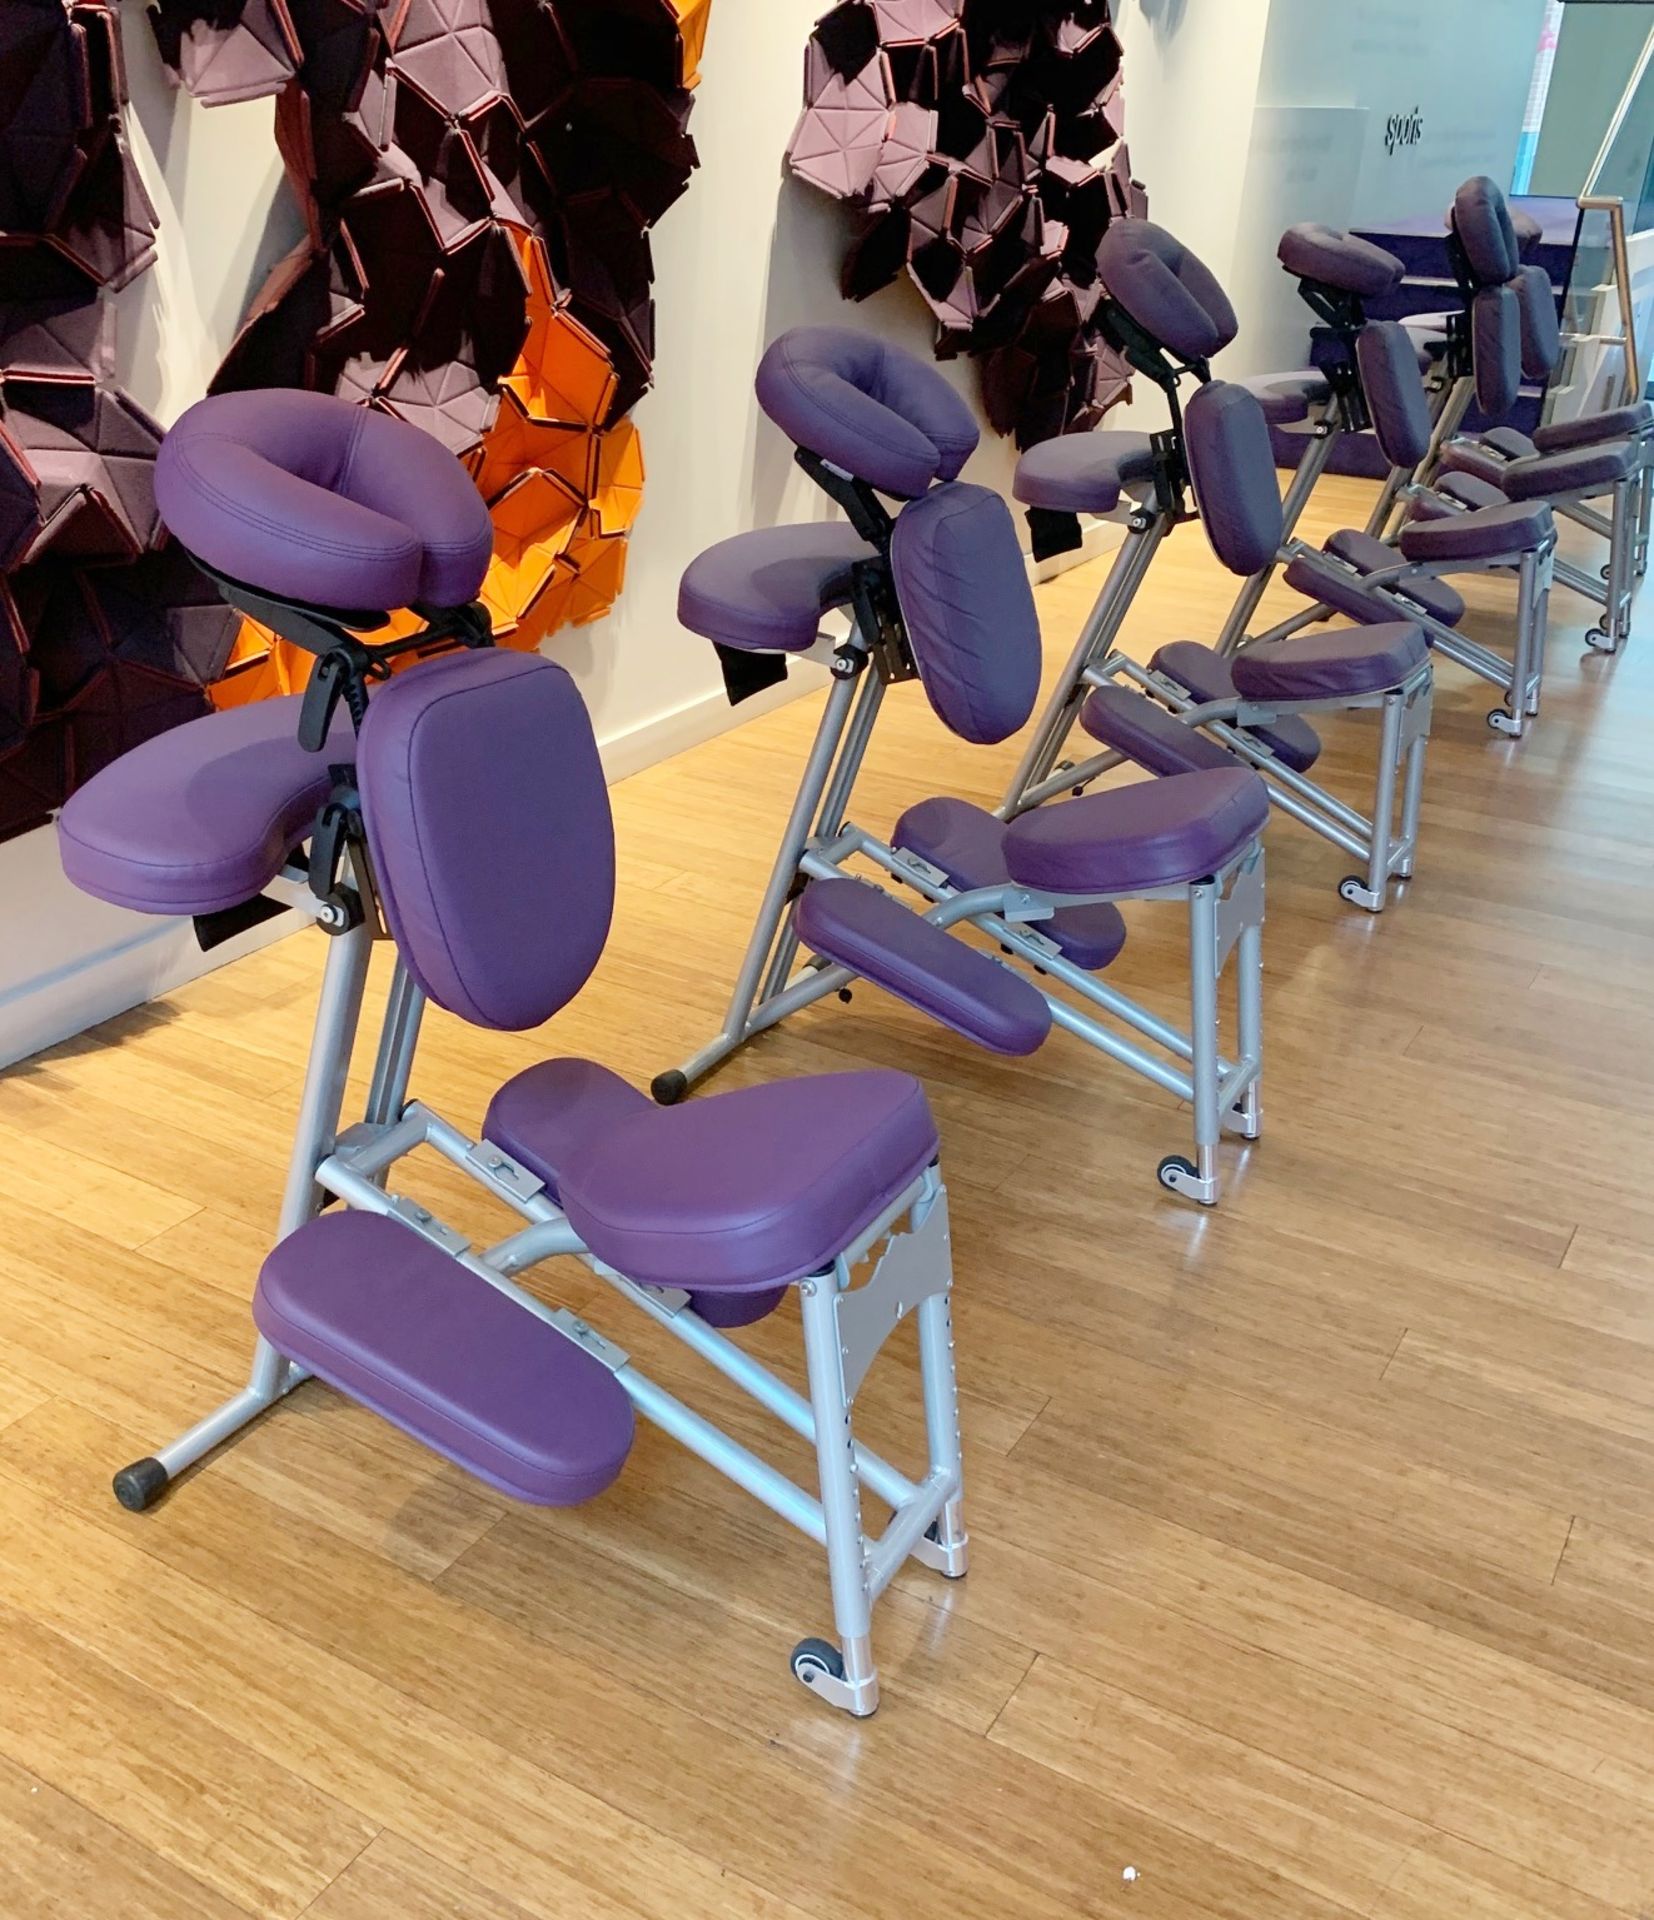 1 x Stronglite Ergo Pro II Purple Massage Chair - Suitable For Tattoo Artists, Spas and Physio - - Image 2 of 4